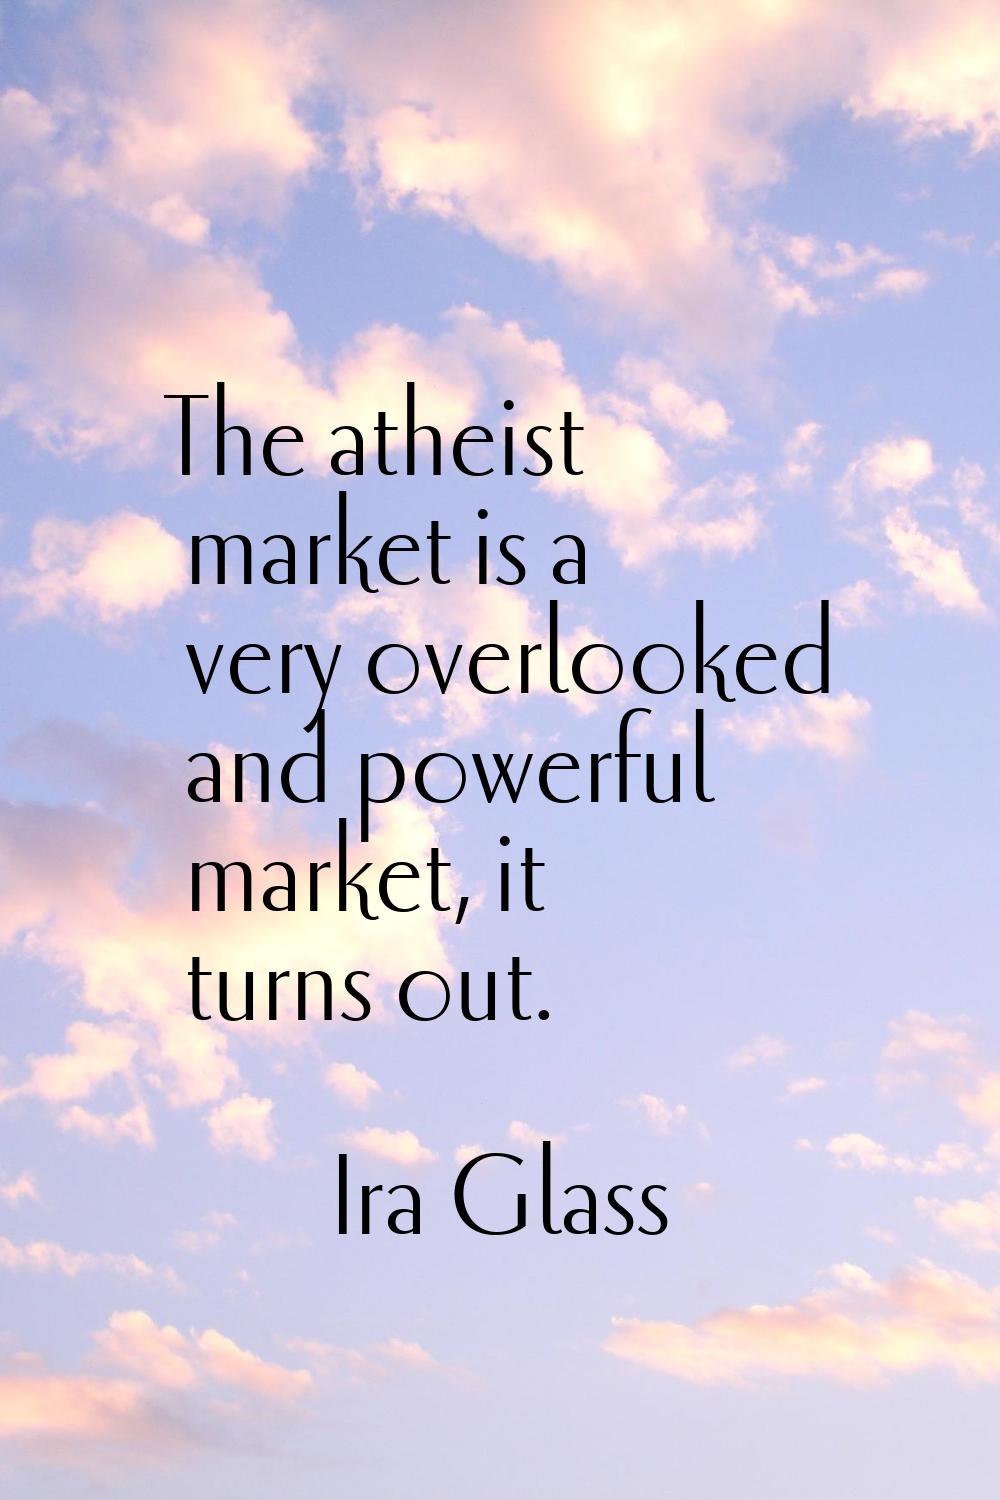 The atheist market is a very overlooked and powerful market, it turns out.